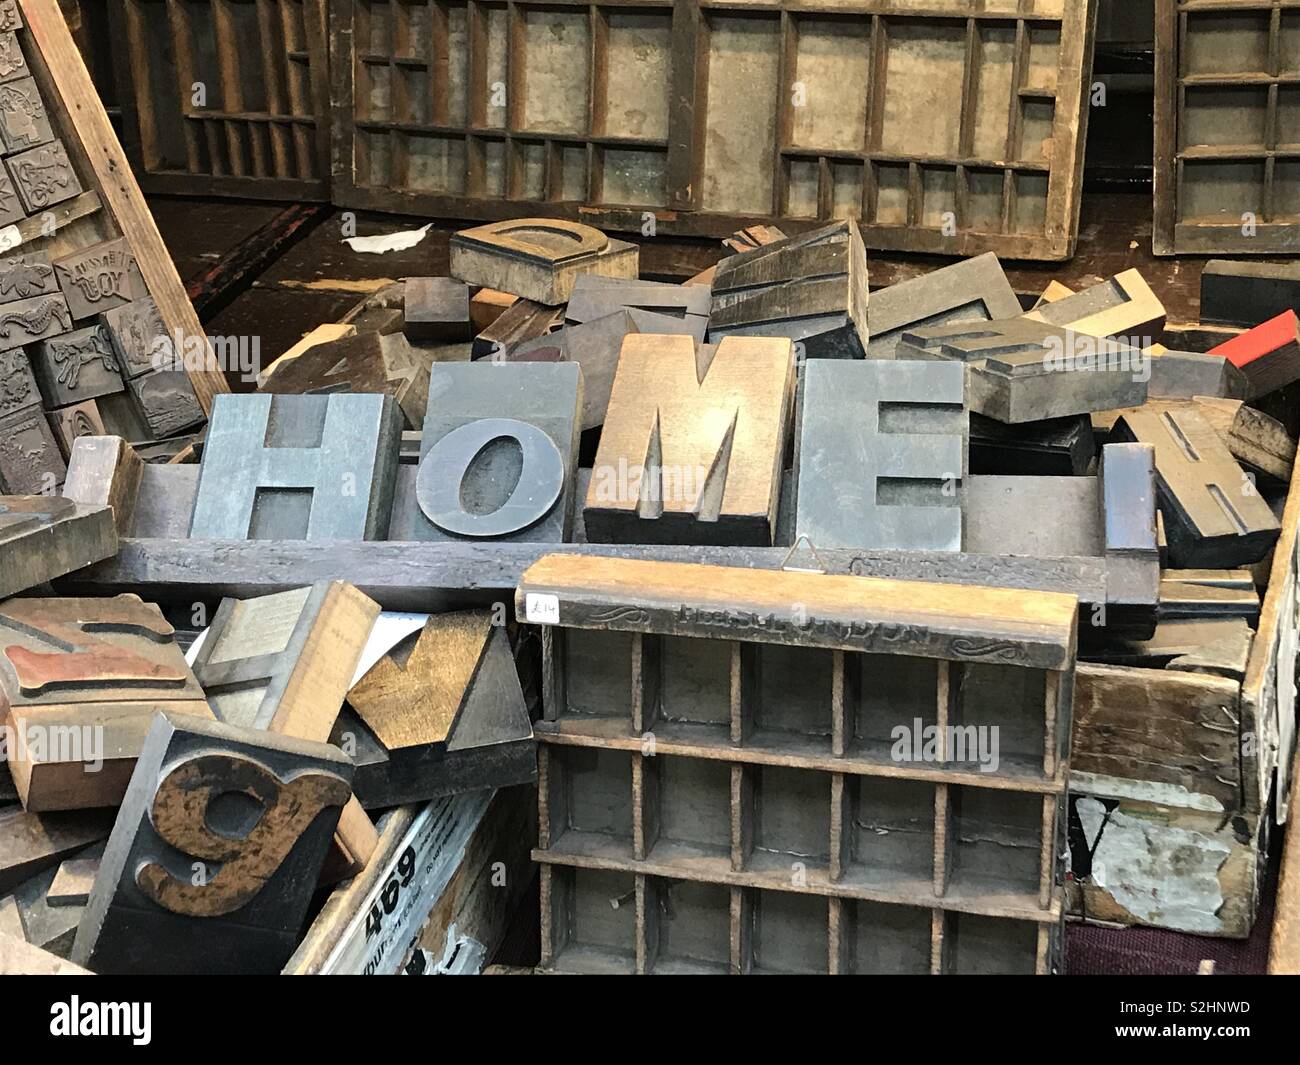 Wooden printing blocks, making a “home” sign. Stock Photo